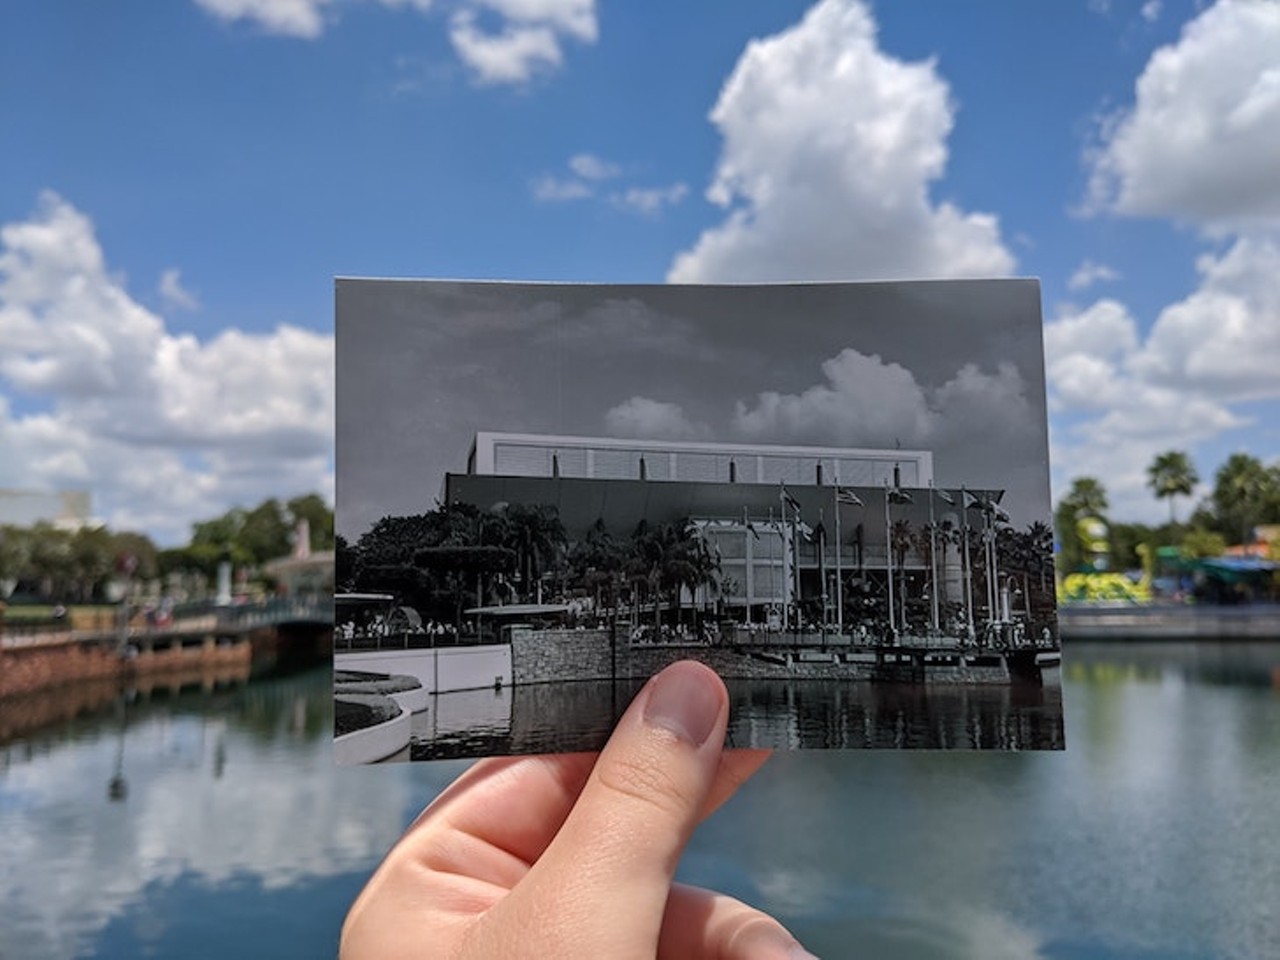 Photos of Universal Orlando thirty years ago, on top on what they look like today